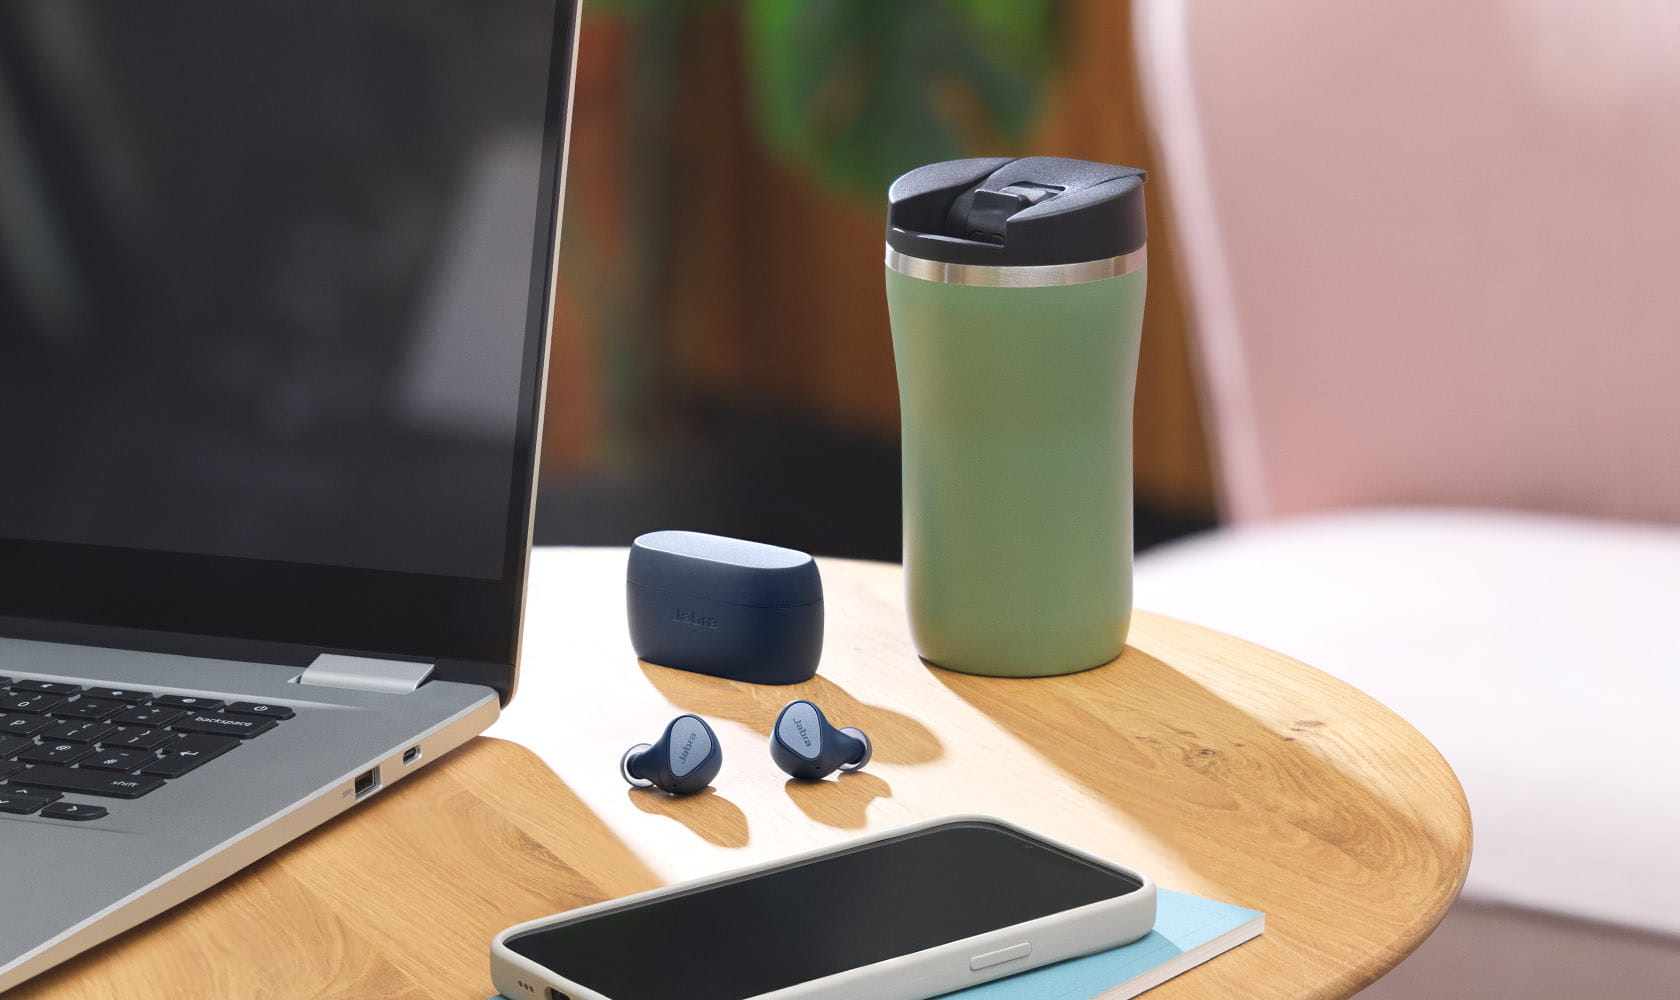 Essential work Elite and 4 | for life earbuds